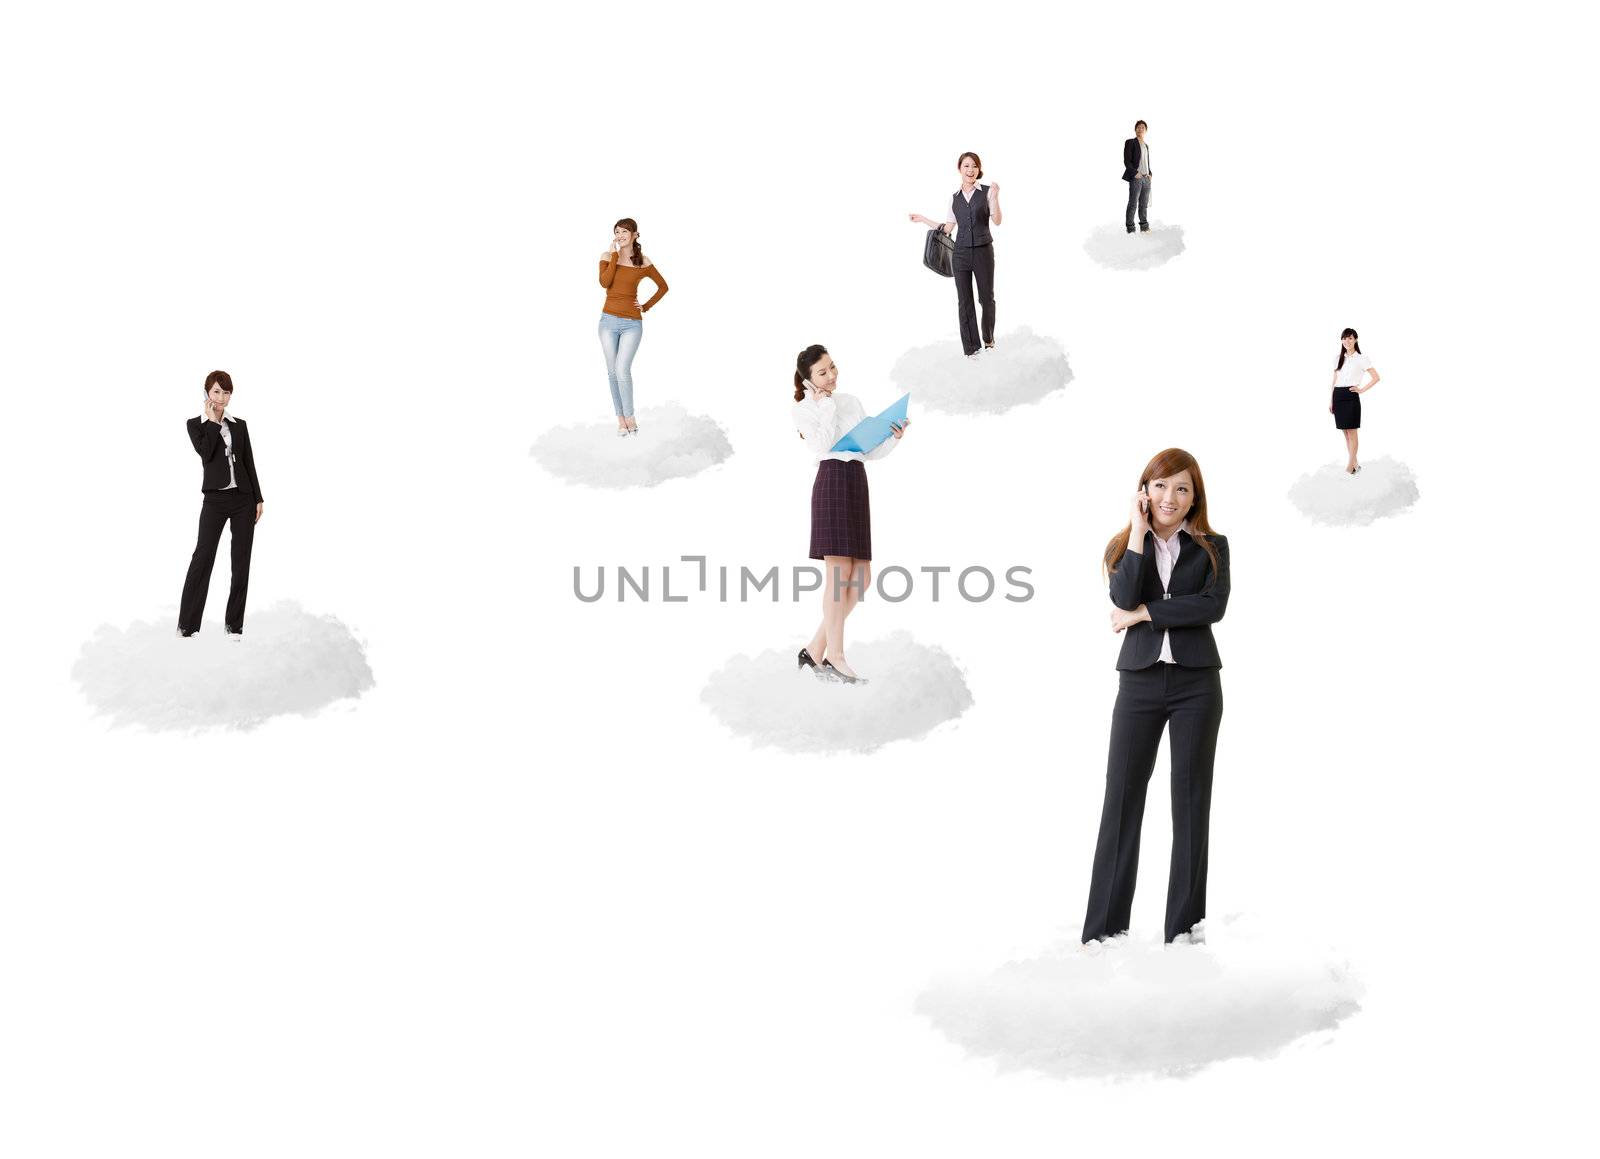 Business network, Asian business people use mobile phone to communicate to each other on white background.